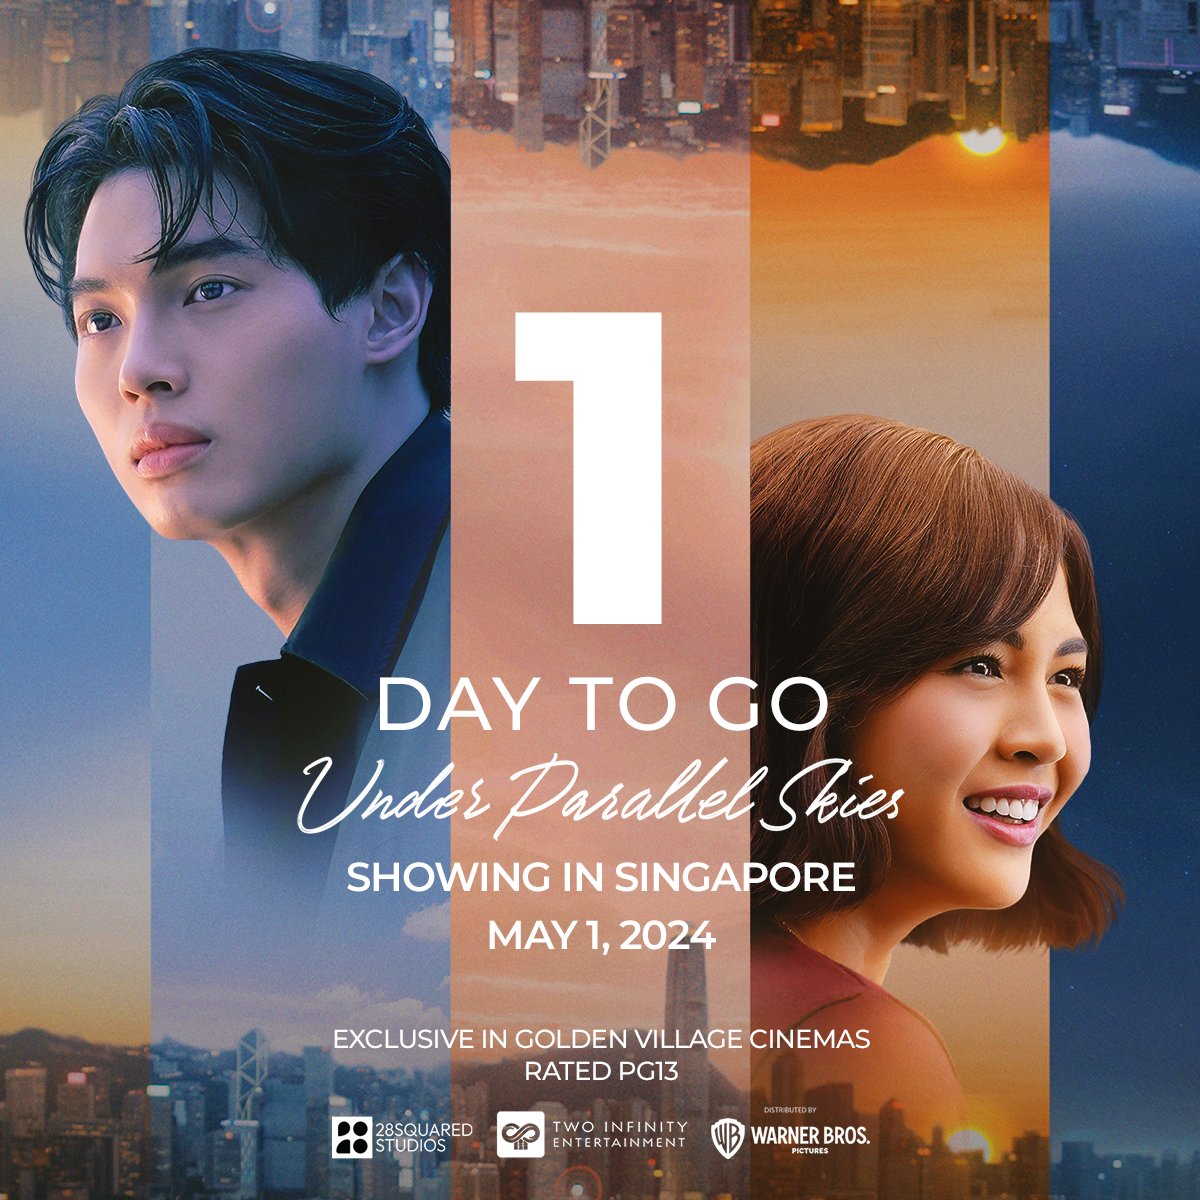 Singapore, just 1 day left to experience the magic of being under the same parallel skies as Parin & Iris in 'Under Parallel Skies'! Don't miss out! ✨

Catch #WinMetawin and #JanellaSalvador in one of the most anticipated film collaborations of the year in Asia,…